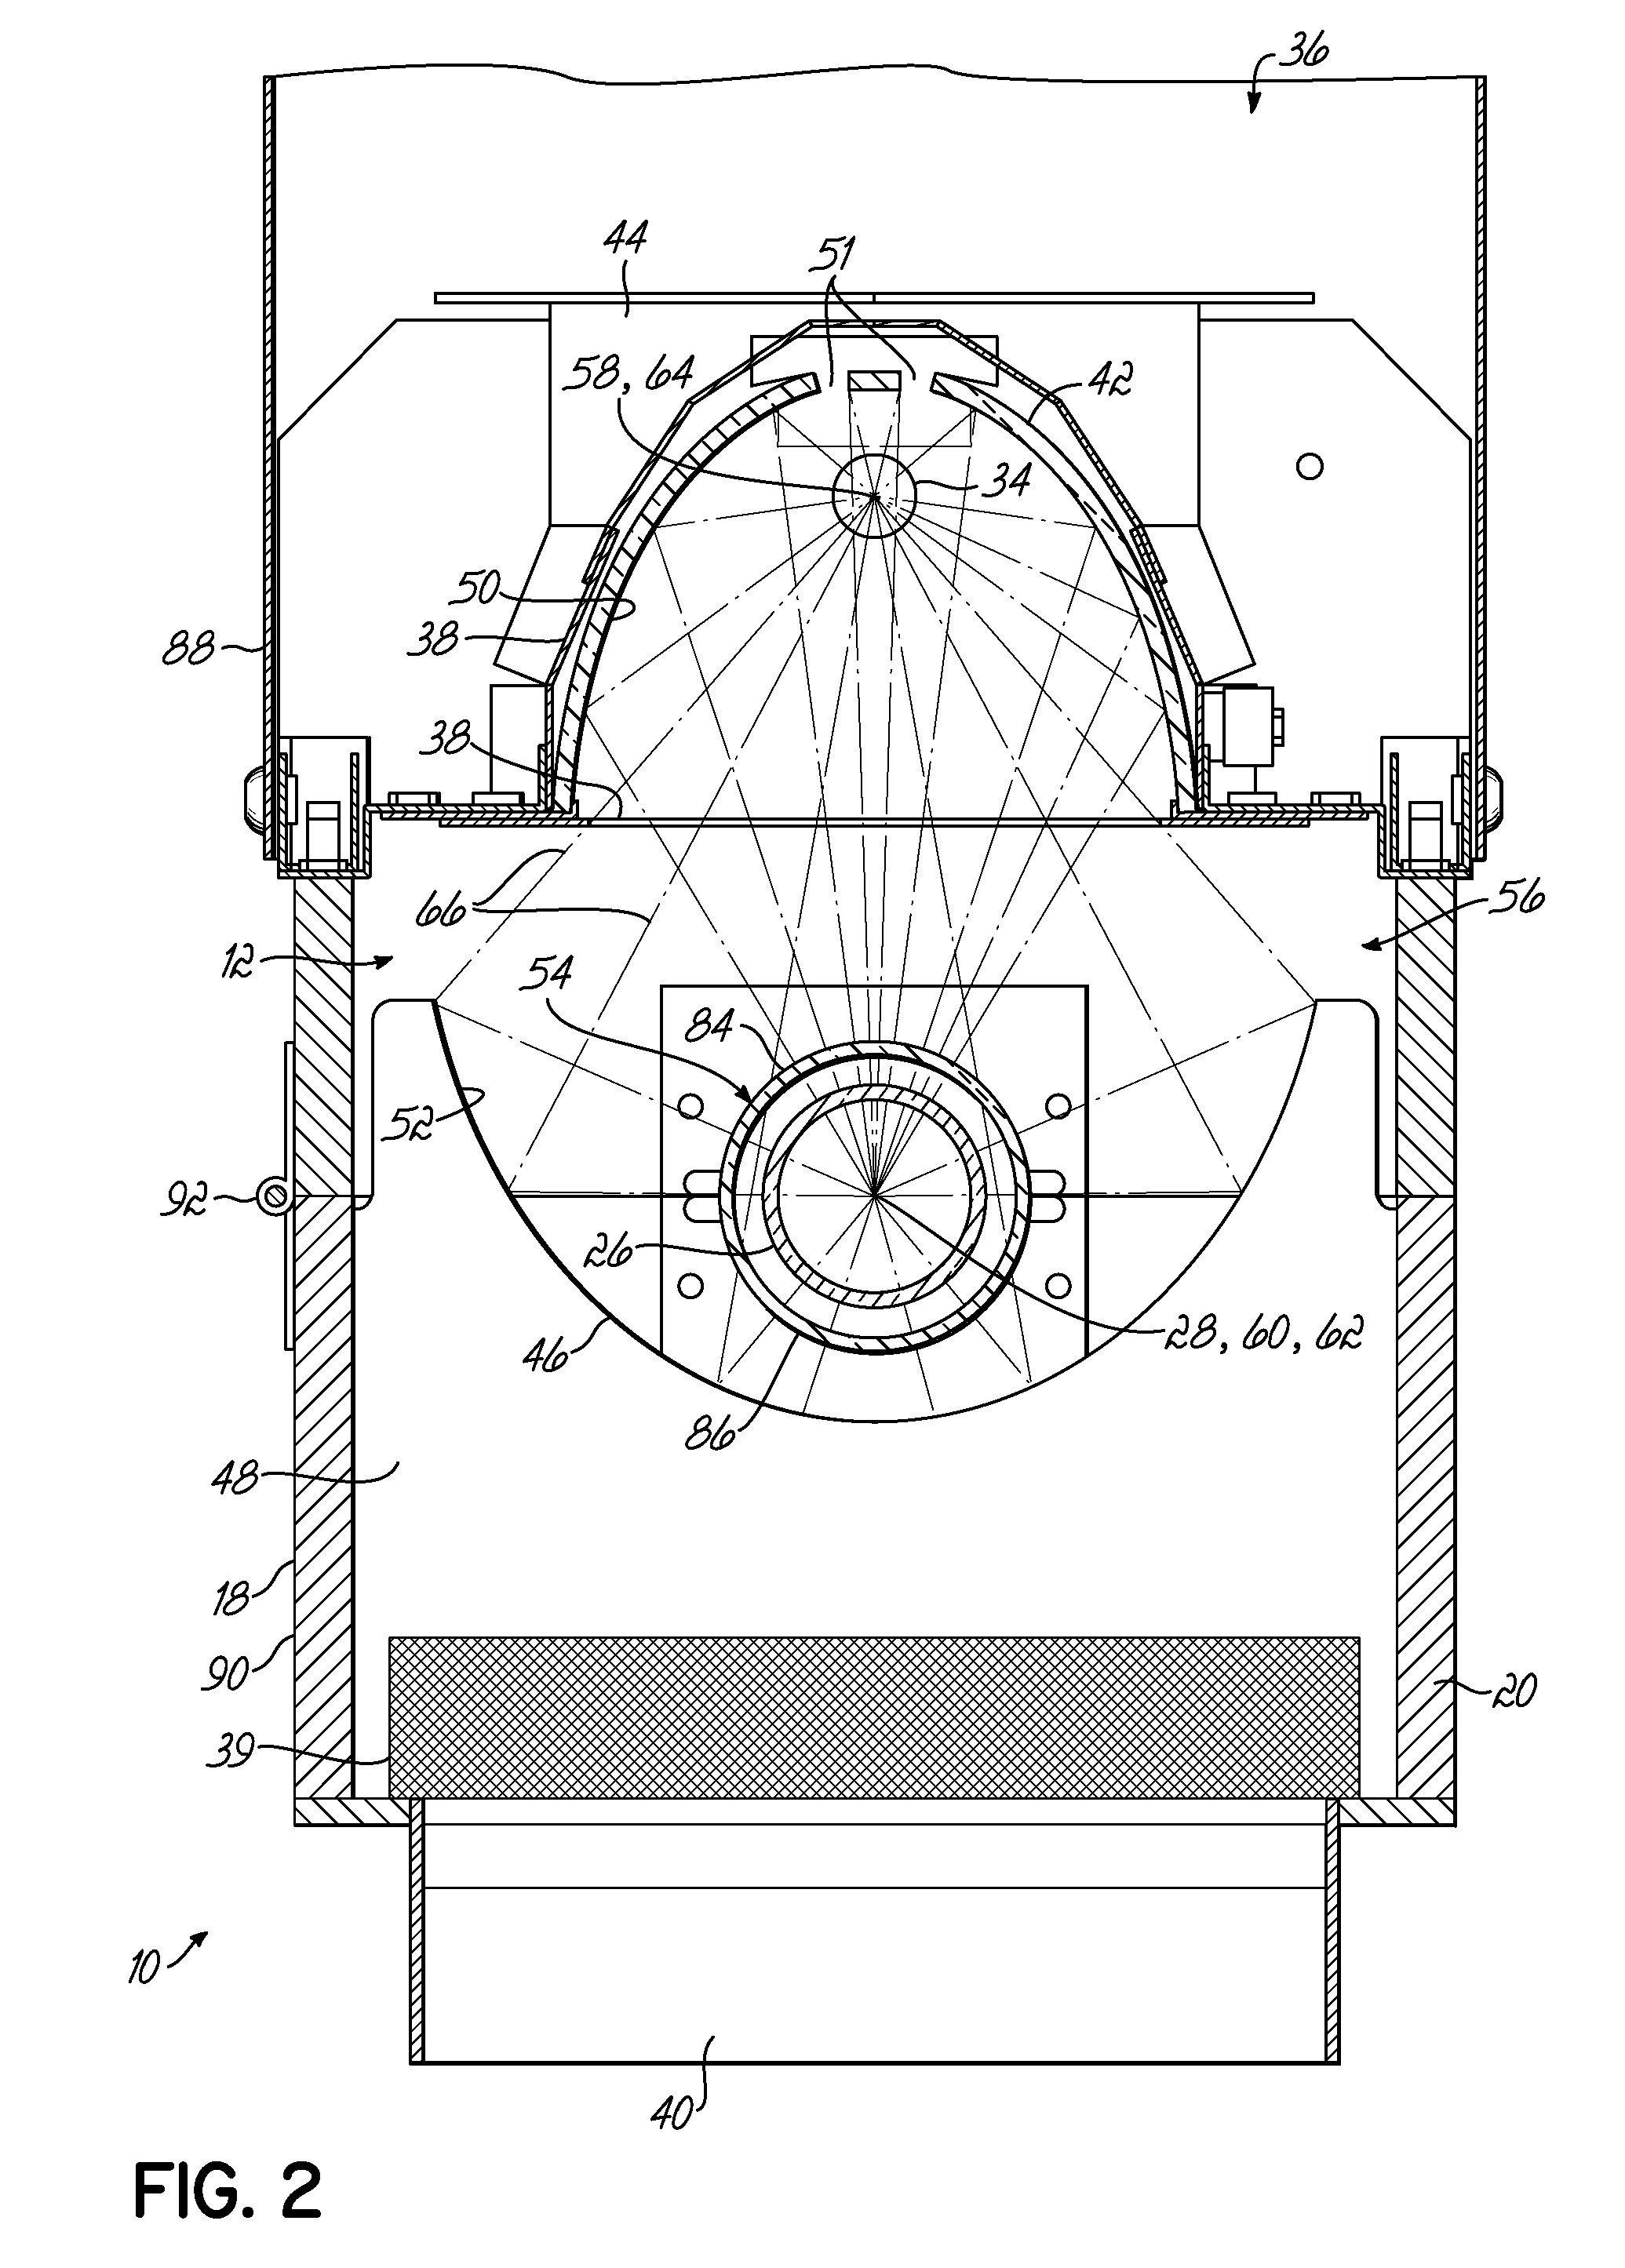 Ultraviolet curing apparatus for continuous material